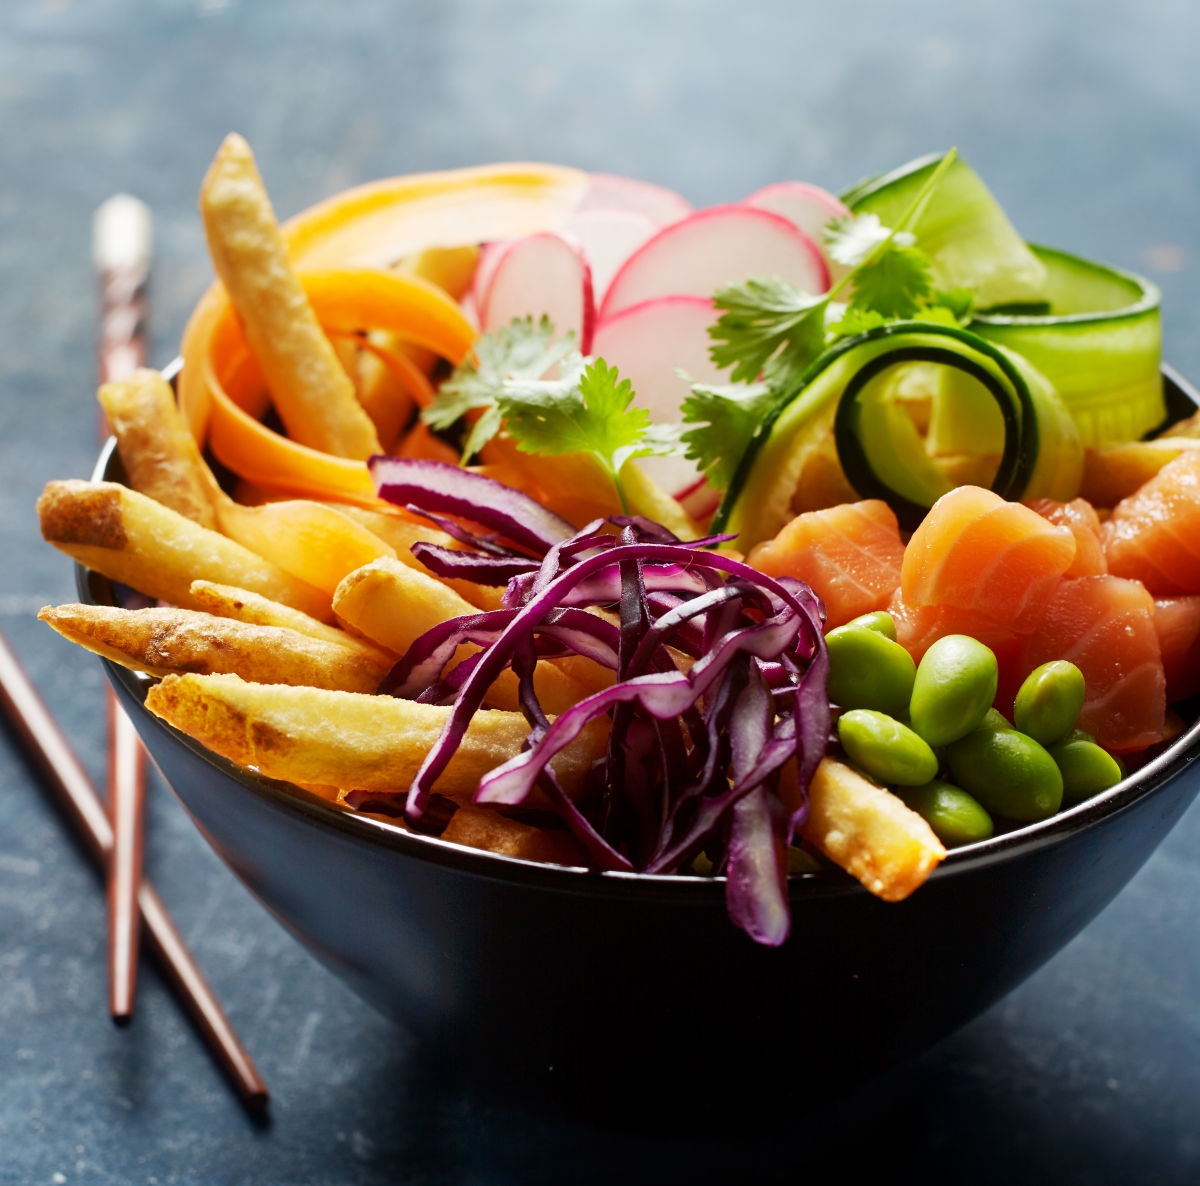 Poke bowl with fries